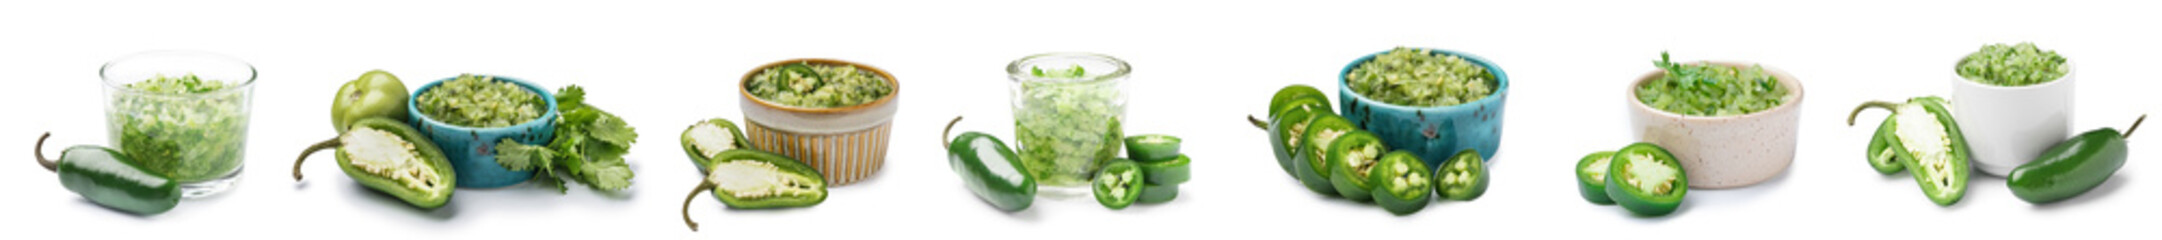 Collage of natural green salsa sauce on white background